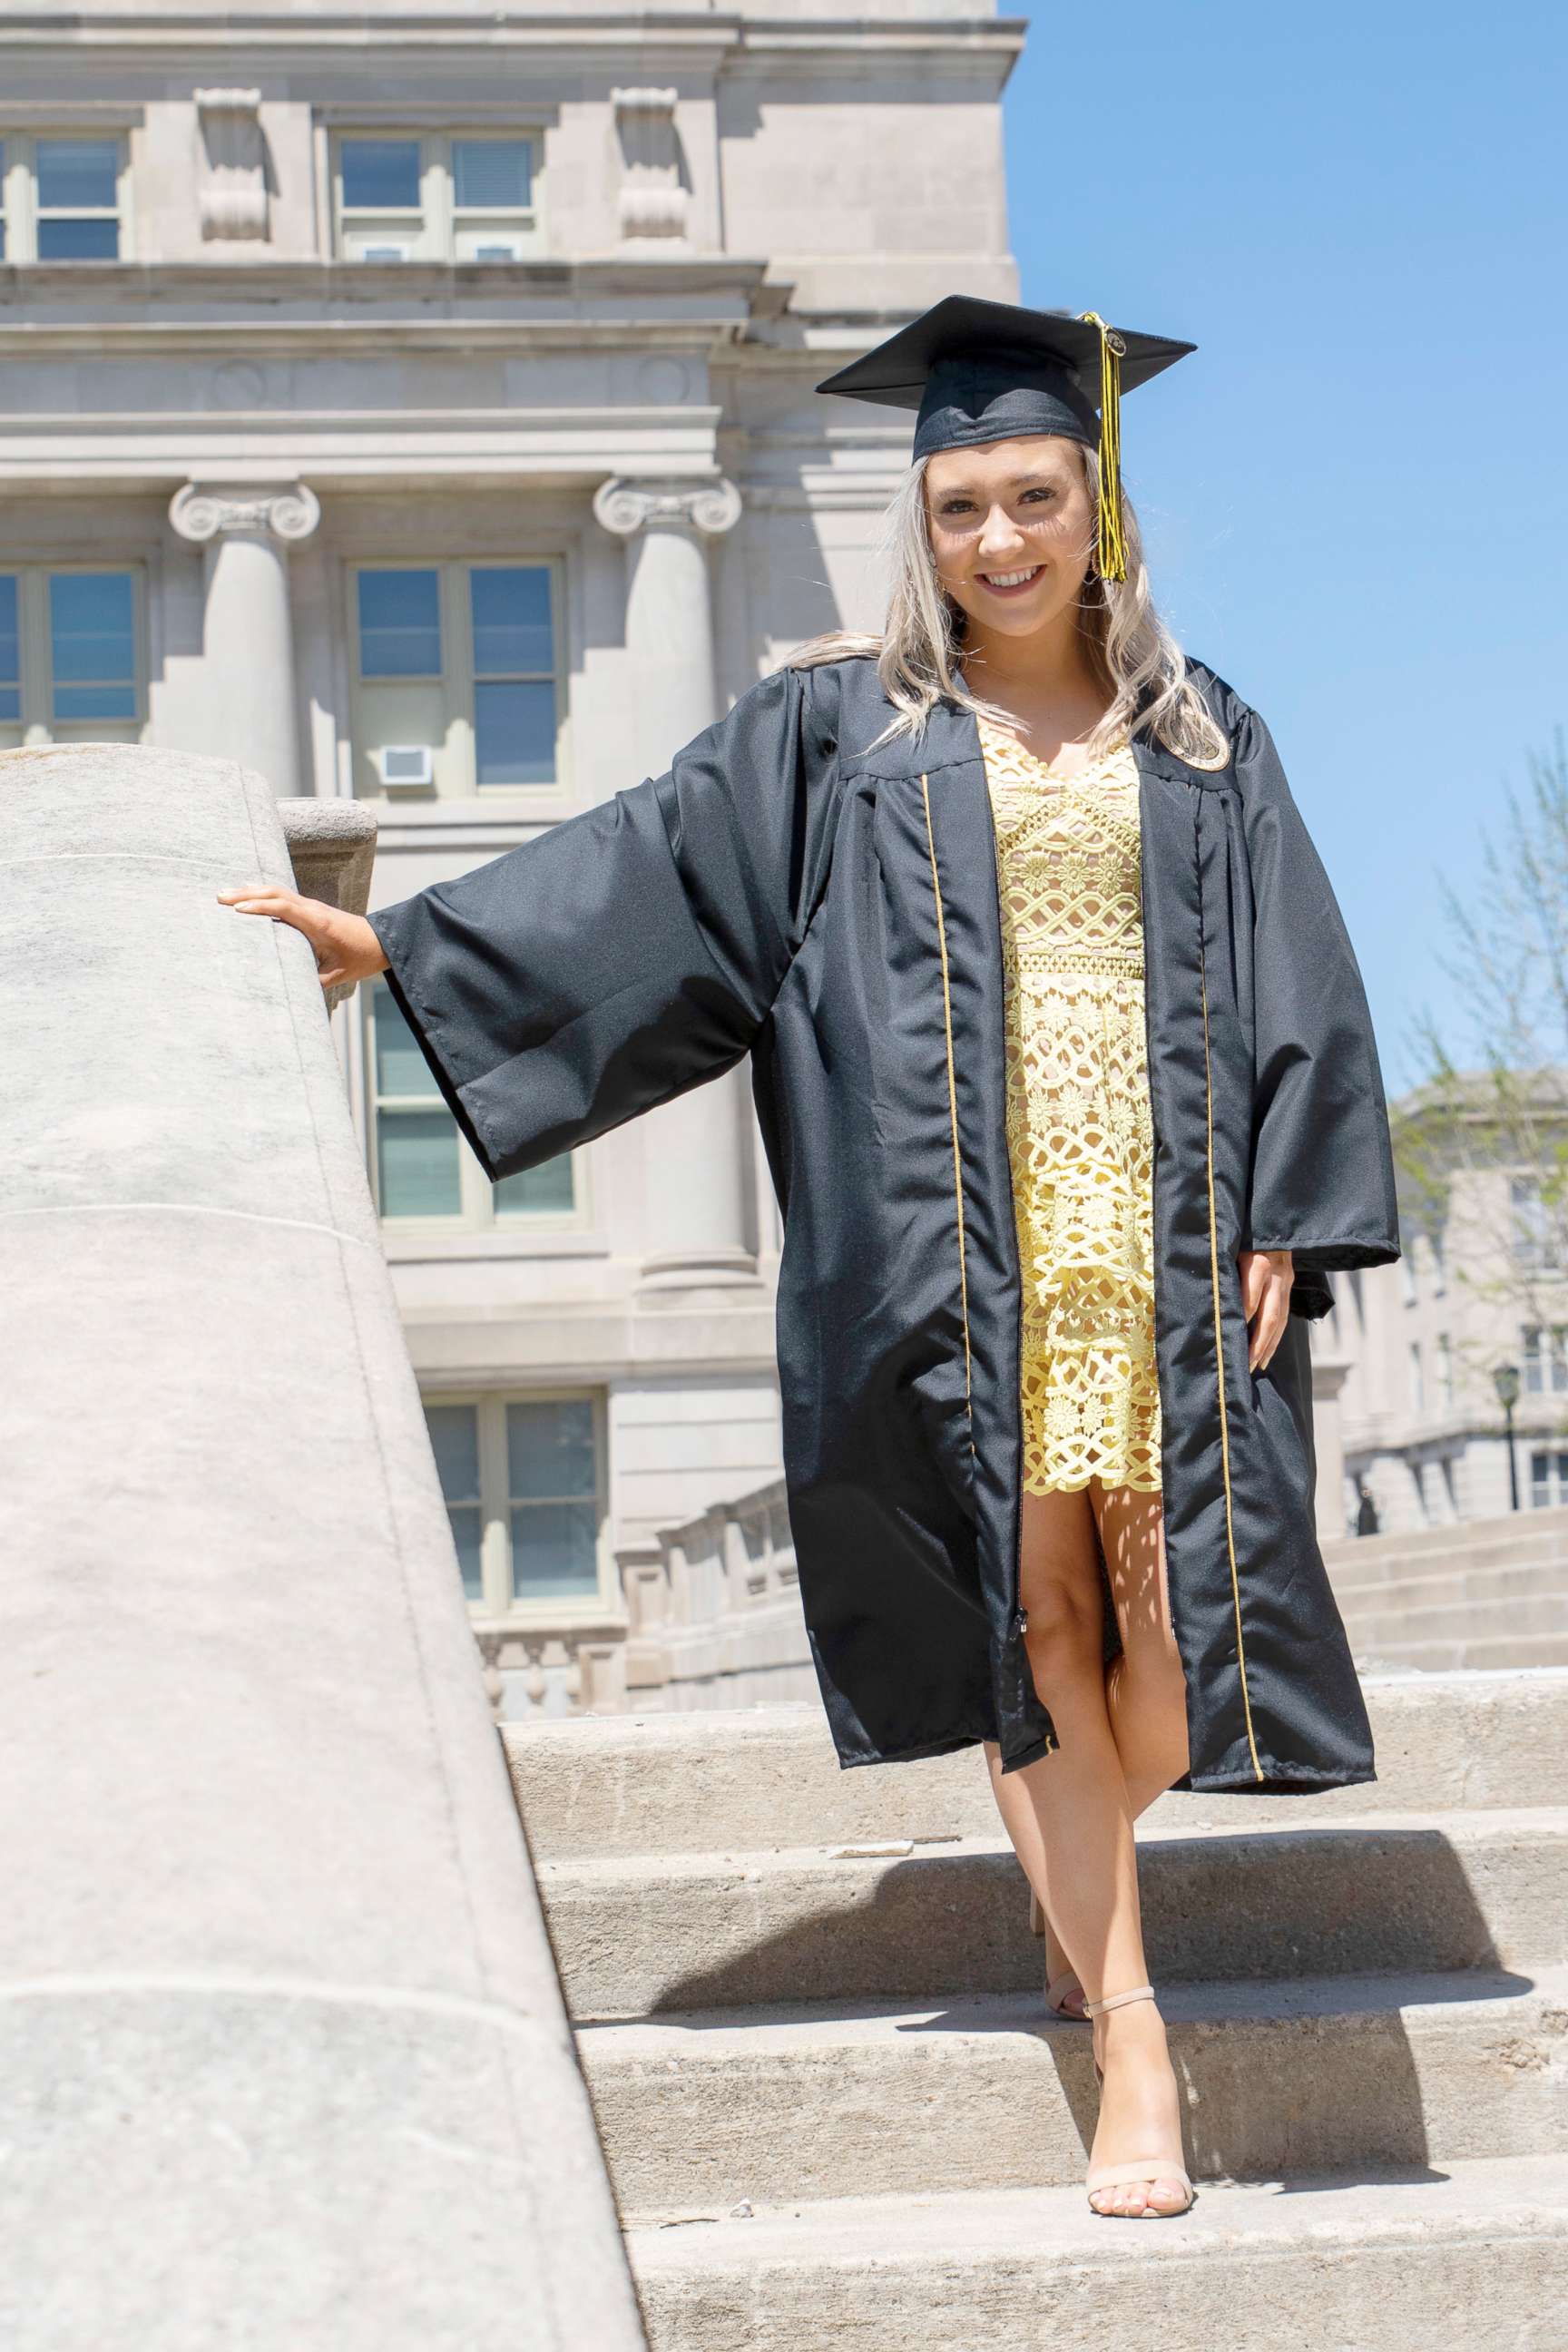 PHOTO: Alexis Gore poses in her Iowa University cap and gown in an undated photo.